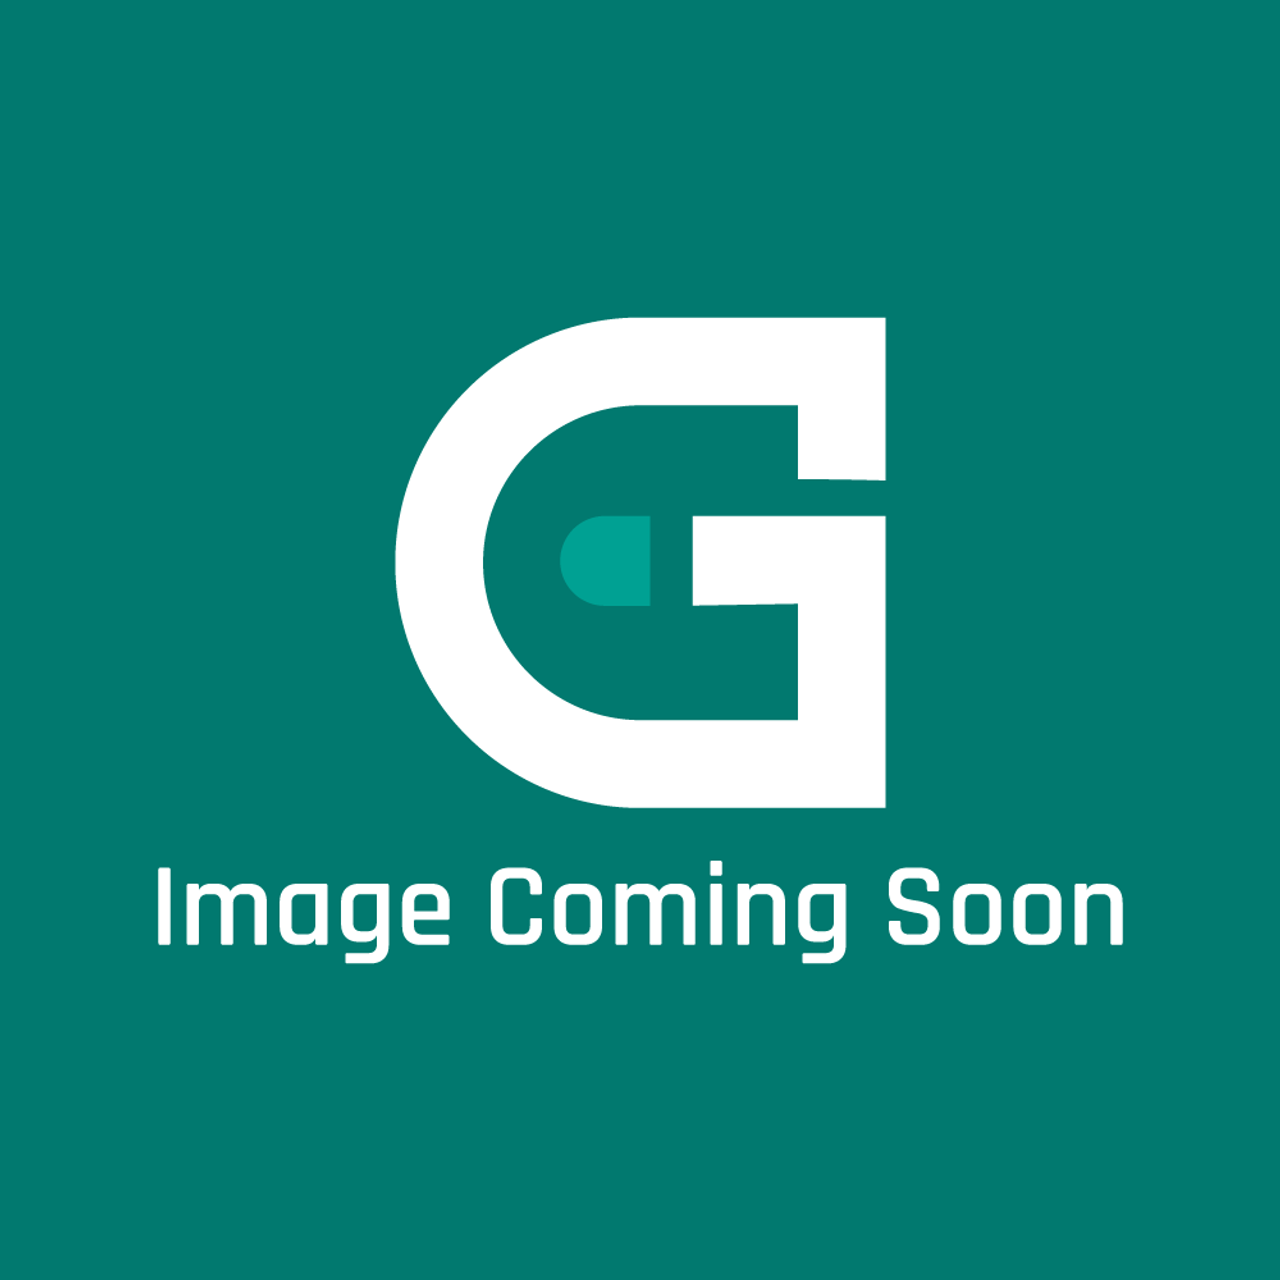 Frigidaire - Electrolux A00010702 - Liner - Image Coming Soon!